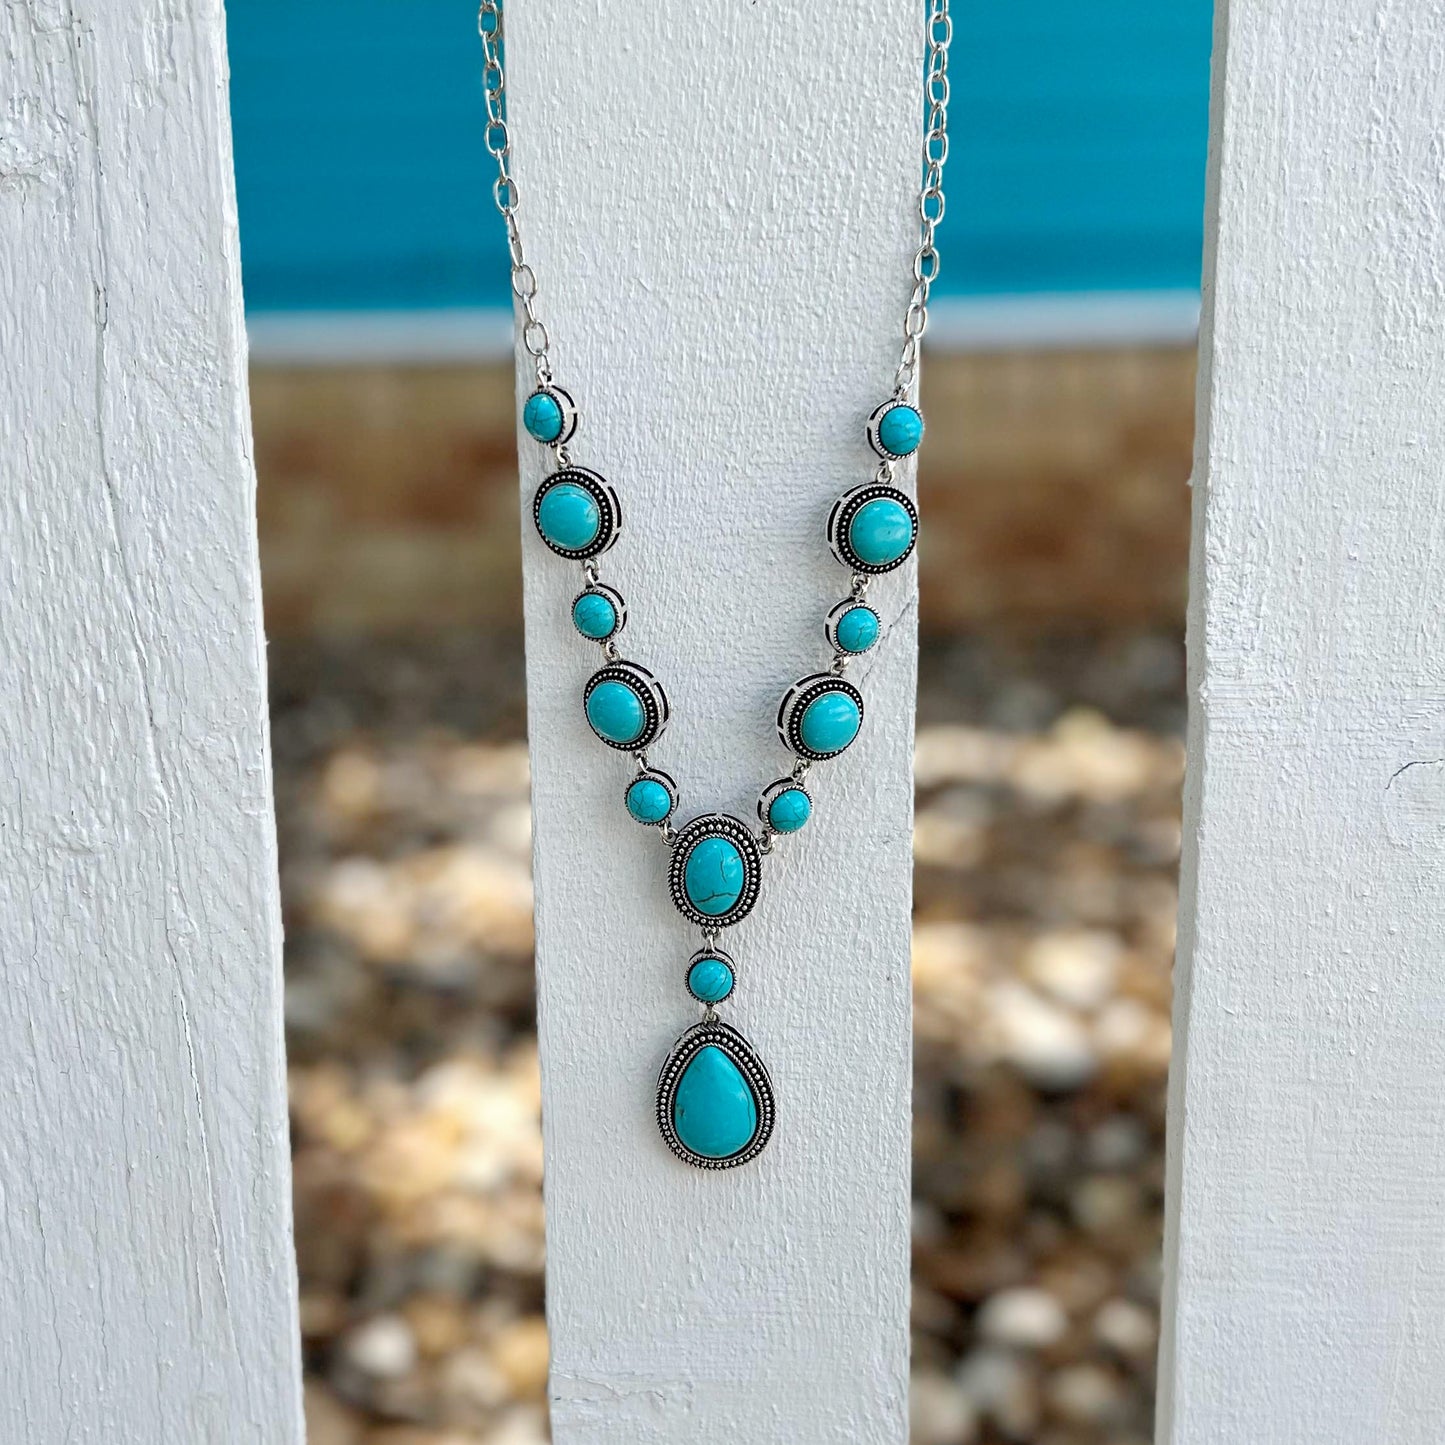 Drop some Turquoise Necklace